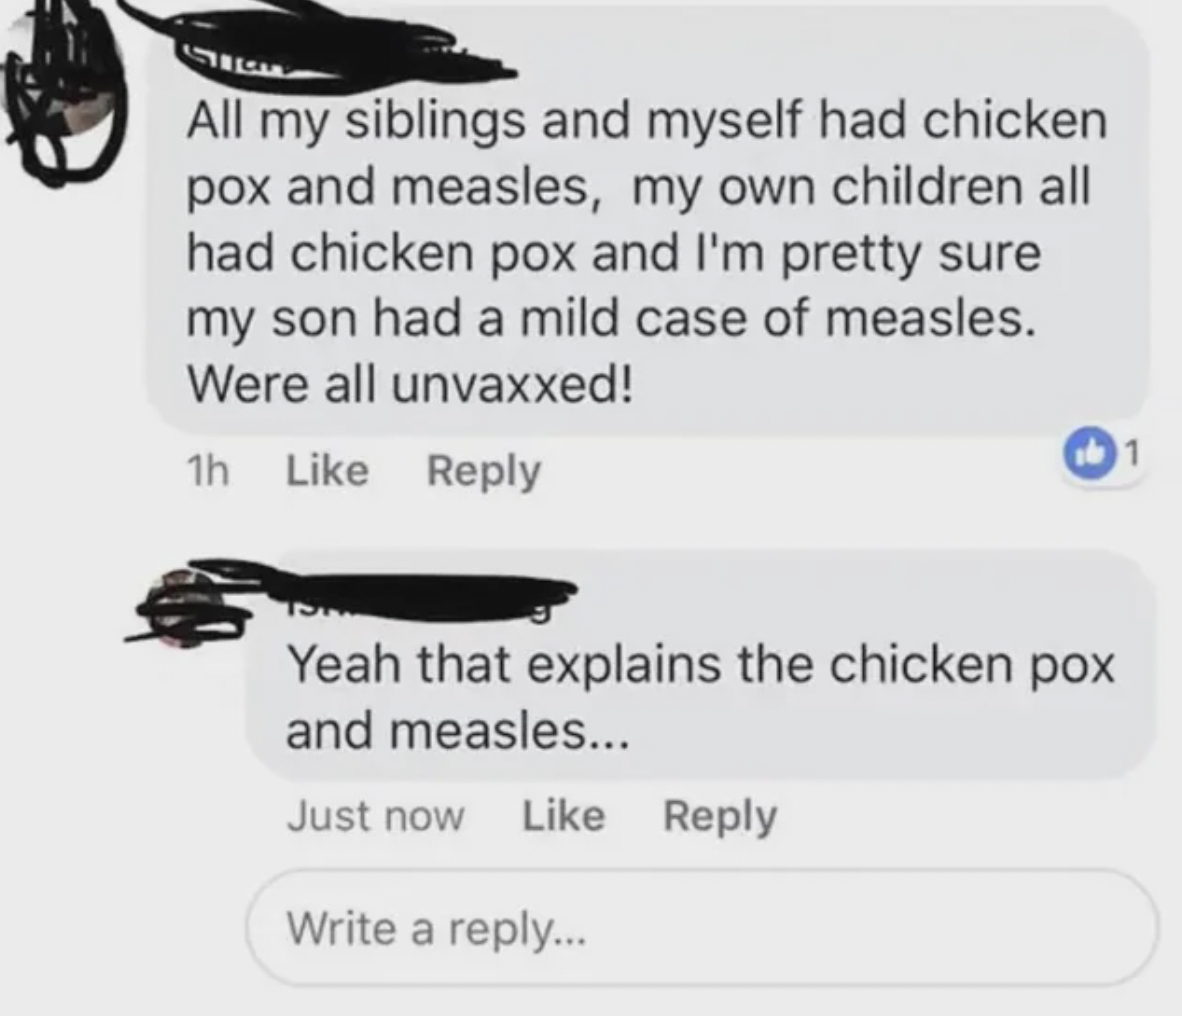 screenshot - All my siblings and myself had chicken pox and measles, my own children all had chicken pox and I'm pretty sure my son had a mild case of measles. Were all unvaxxed! 1h Yeah that explains the chicken pox and measles... Just now Write a ... 1